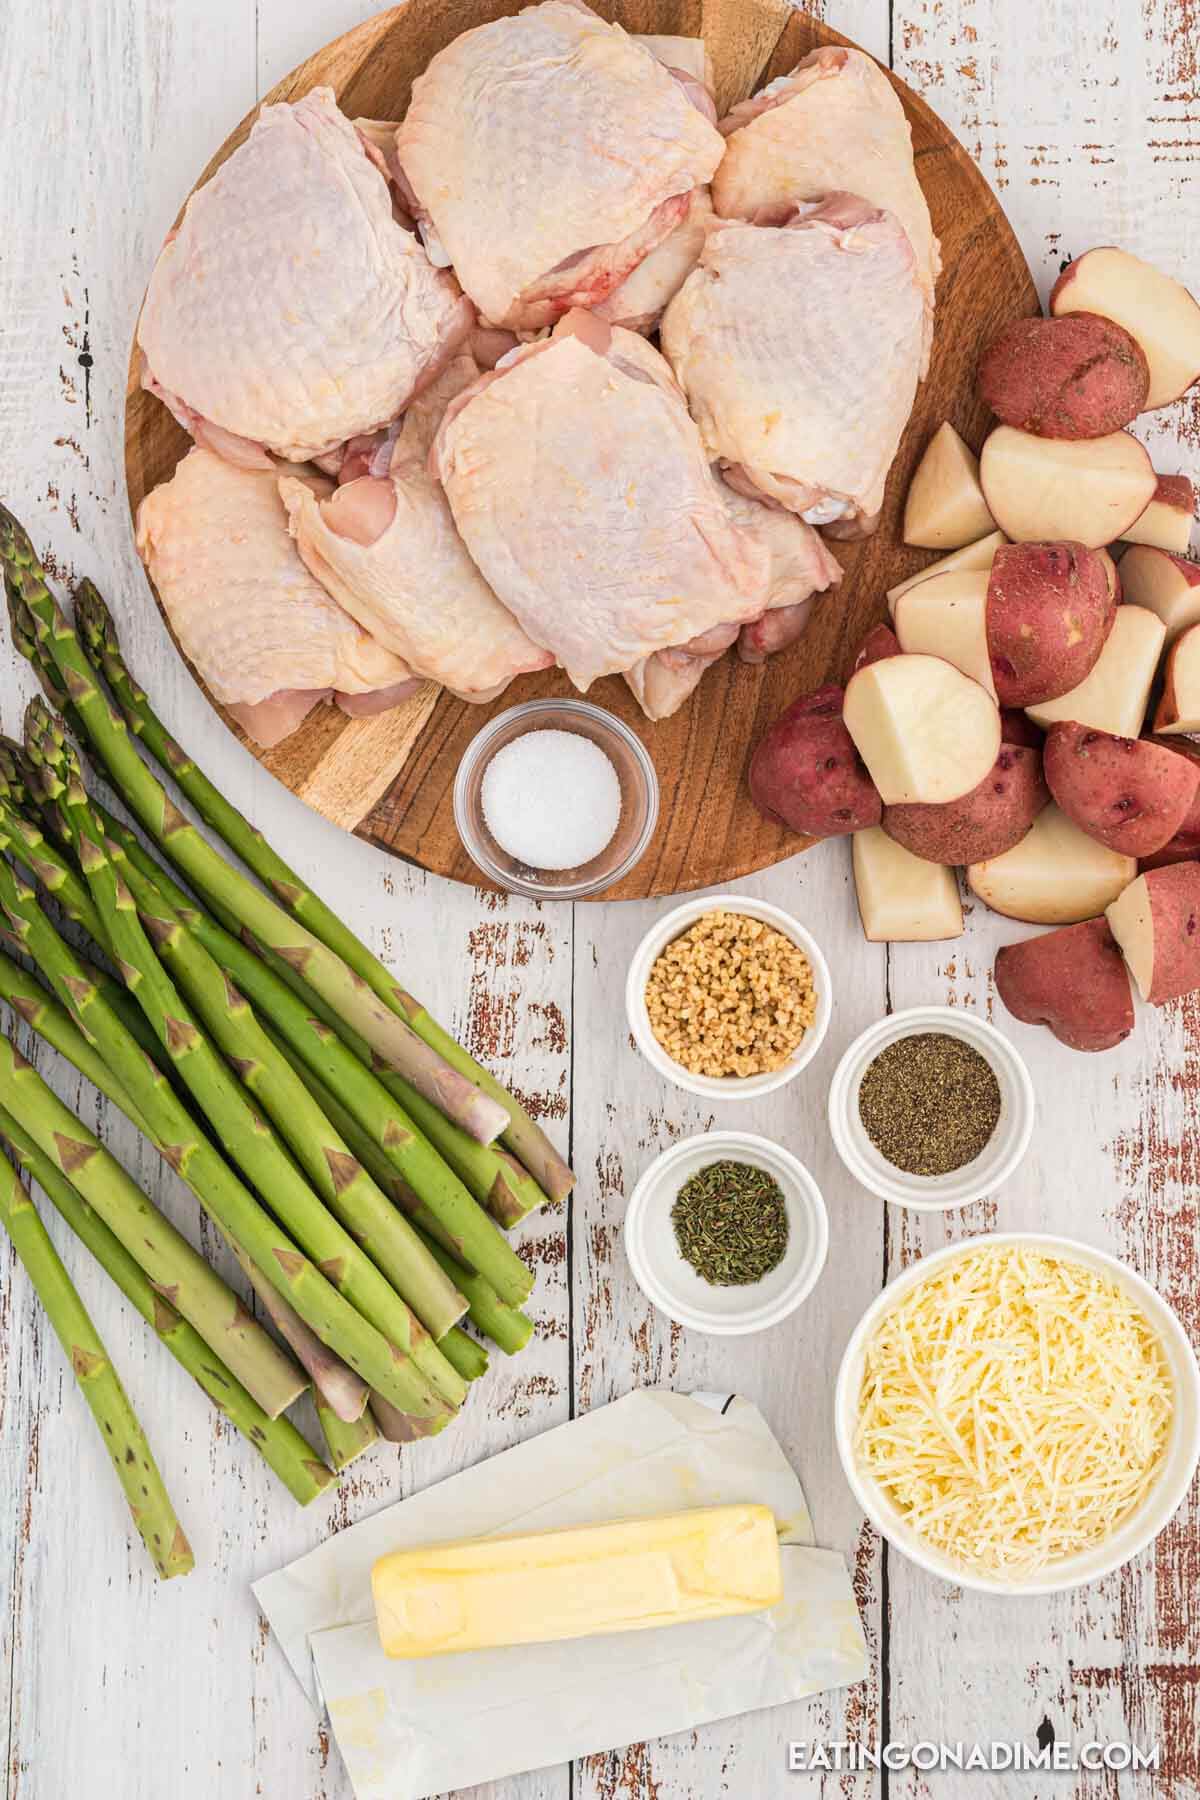 Ingredients needed - chicken thighs, salt and pepper, minced garlic, dried thyme, butter, red potatoes, fresh asparagus, parmesan cheese